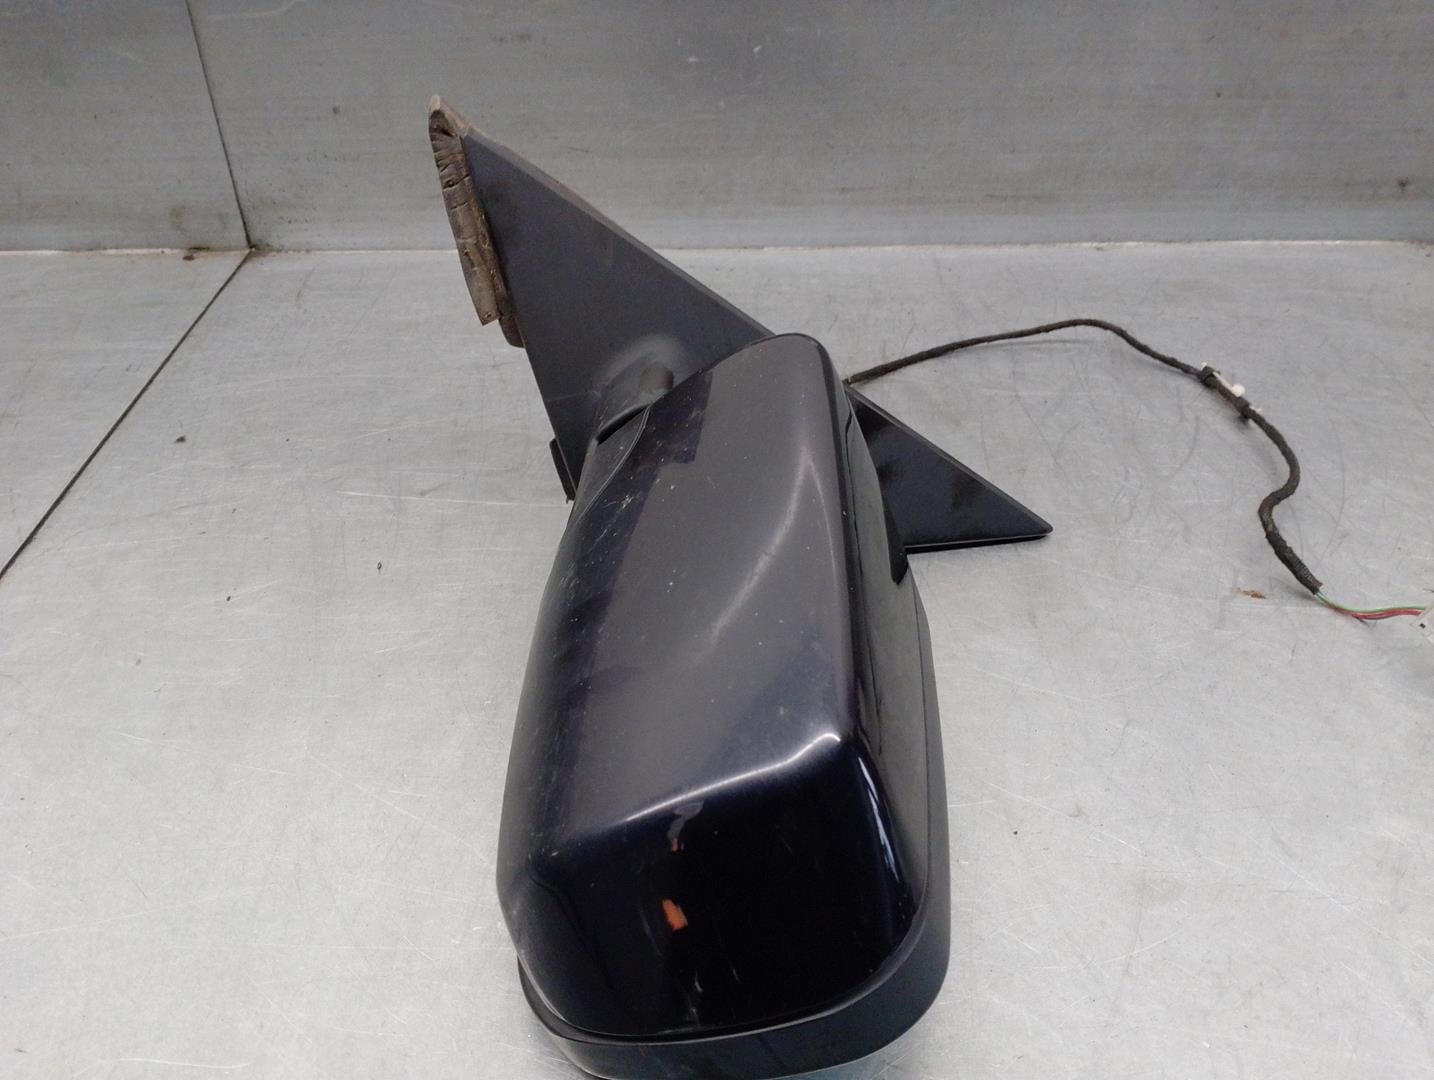 BMW 3 Series E46 (1997-2006) Left Side Wing Mirror 51168245125, 3PINES, 5PUERTAS 24218283